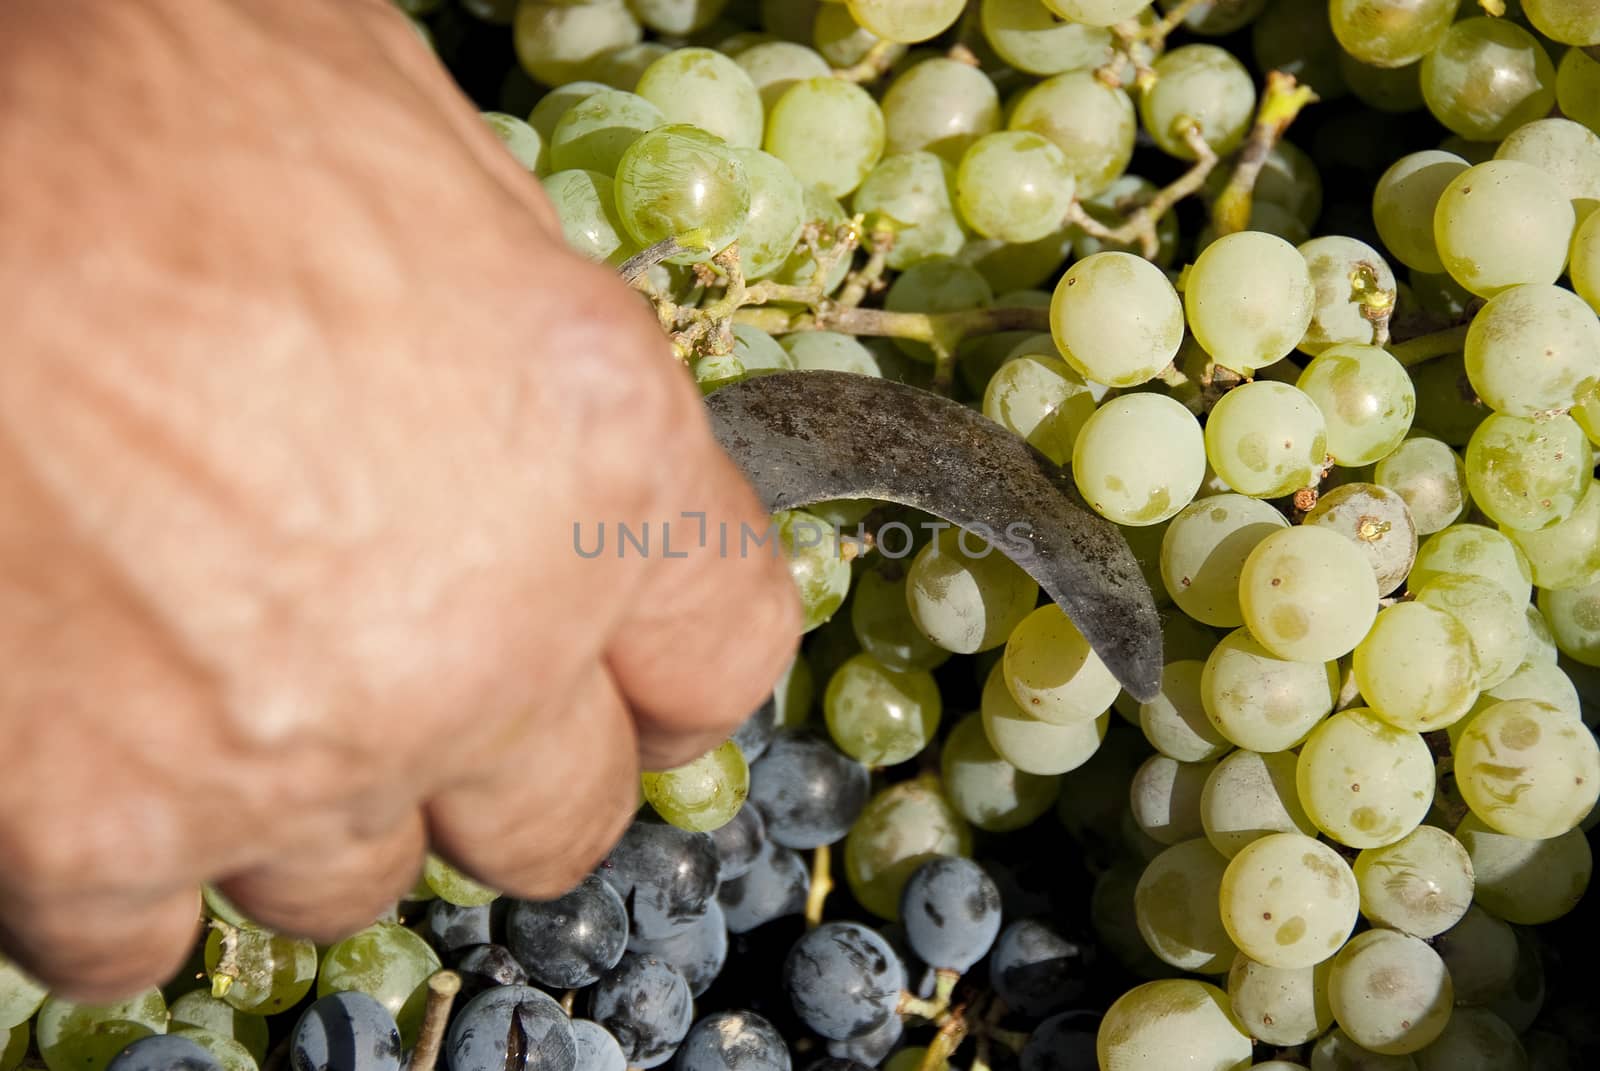 harvesting, black grapes, bunches of grapes, white grapes, tool for harvesting by jalonsohu@gmail.com